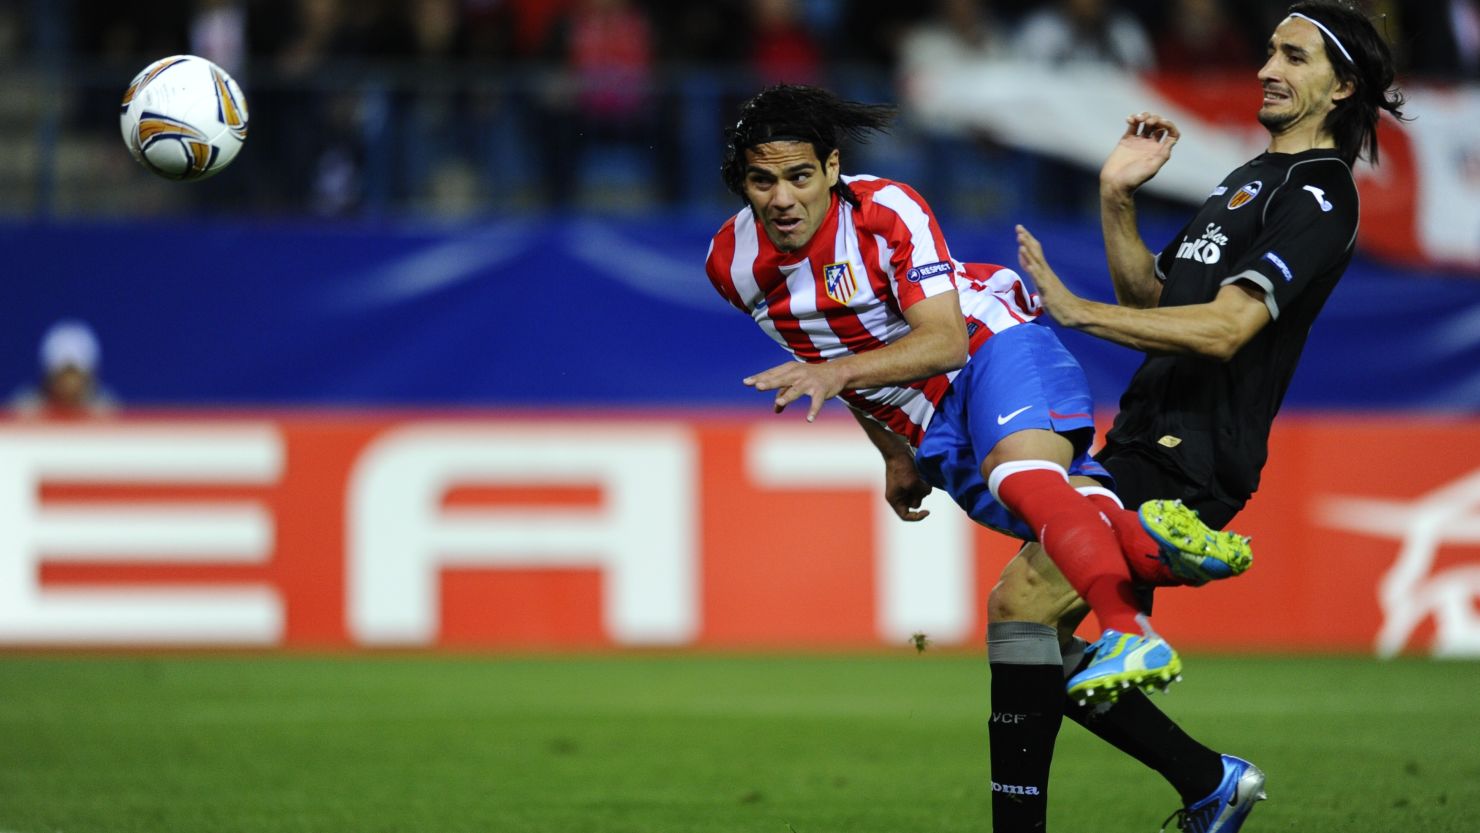 Colombian striker Falcao scores Atletico's first goal in their 4-2 victory over Valencia in the Europa League